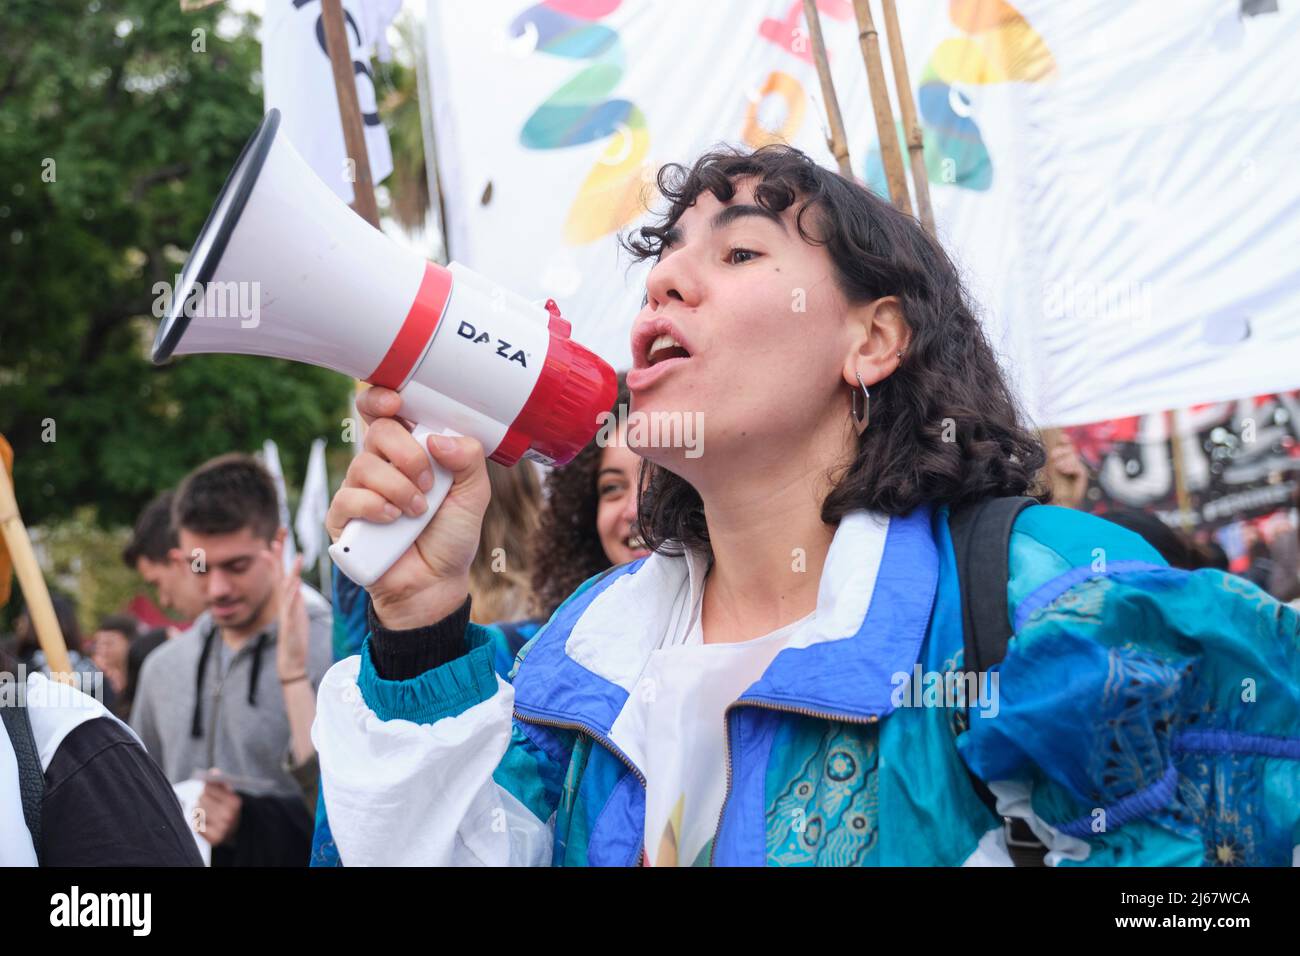 Buenos Aires, Argentina; April 22, 2022: Young activist with a megaphone shouting, cheering on an environmental collective during the Earth Day demons Stock Photo